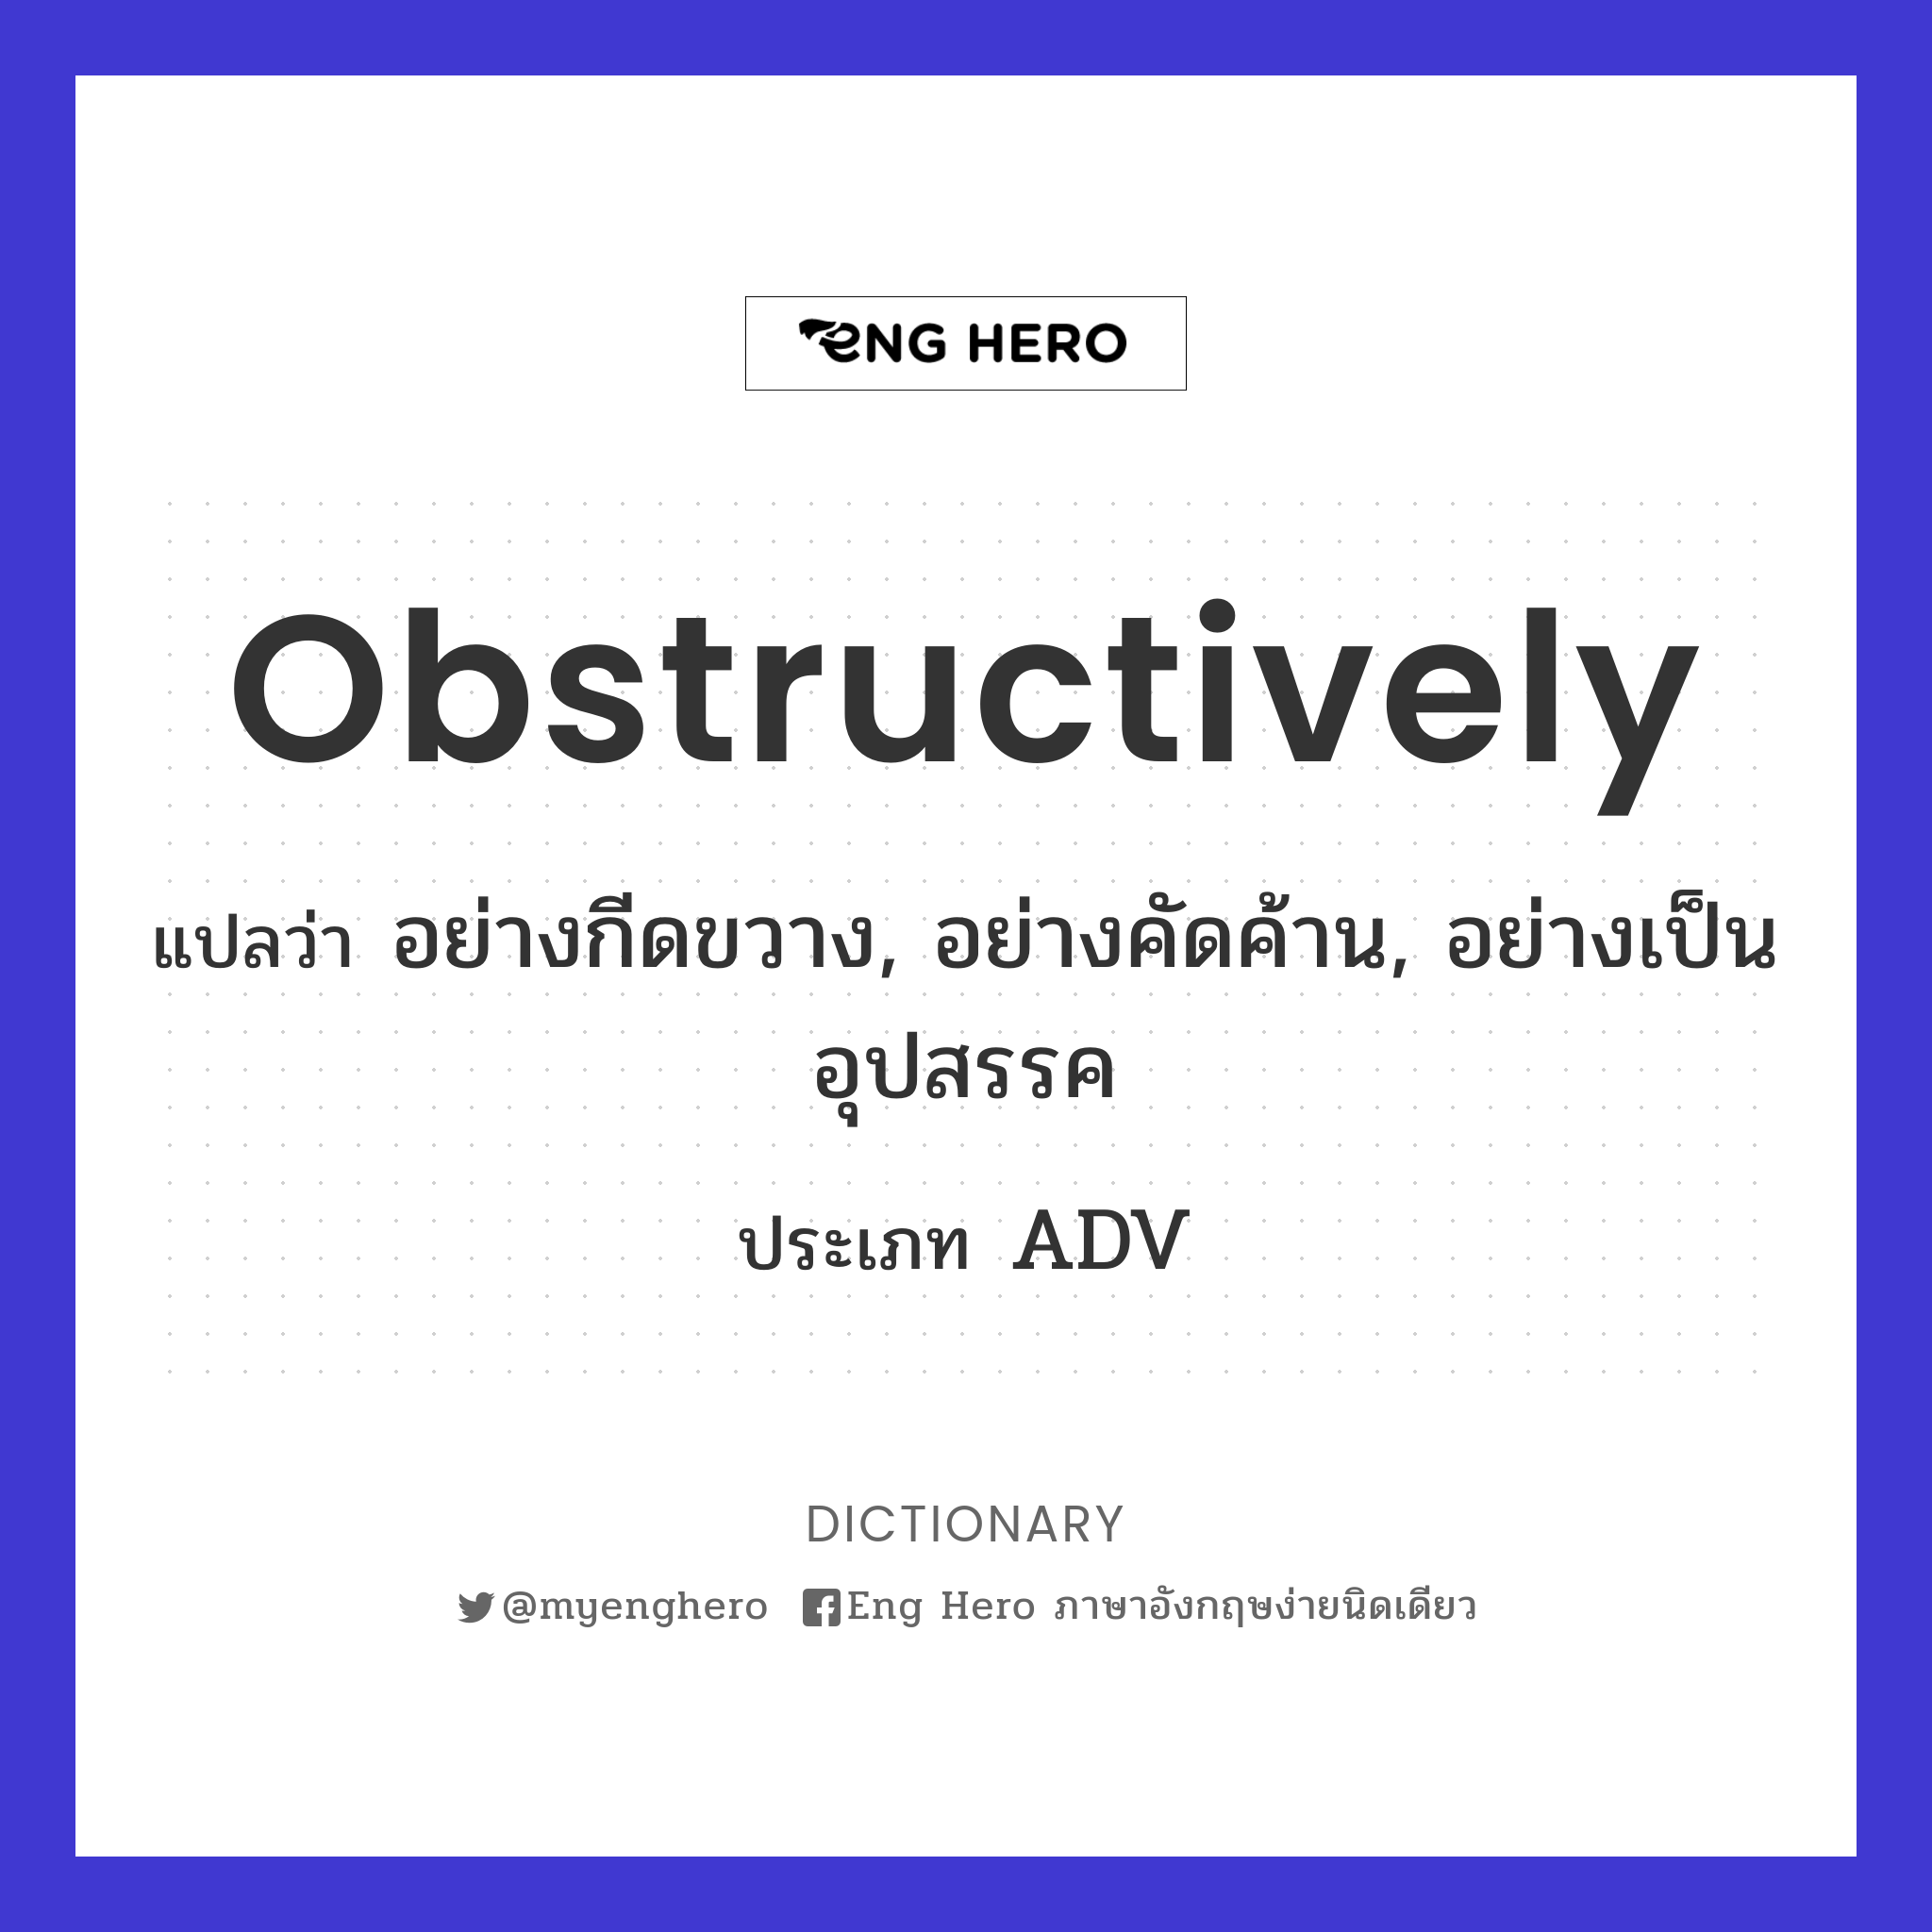 obstructively